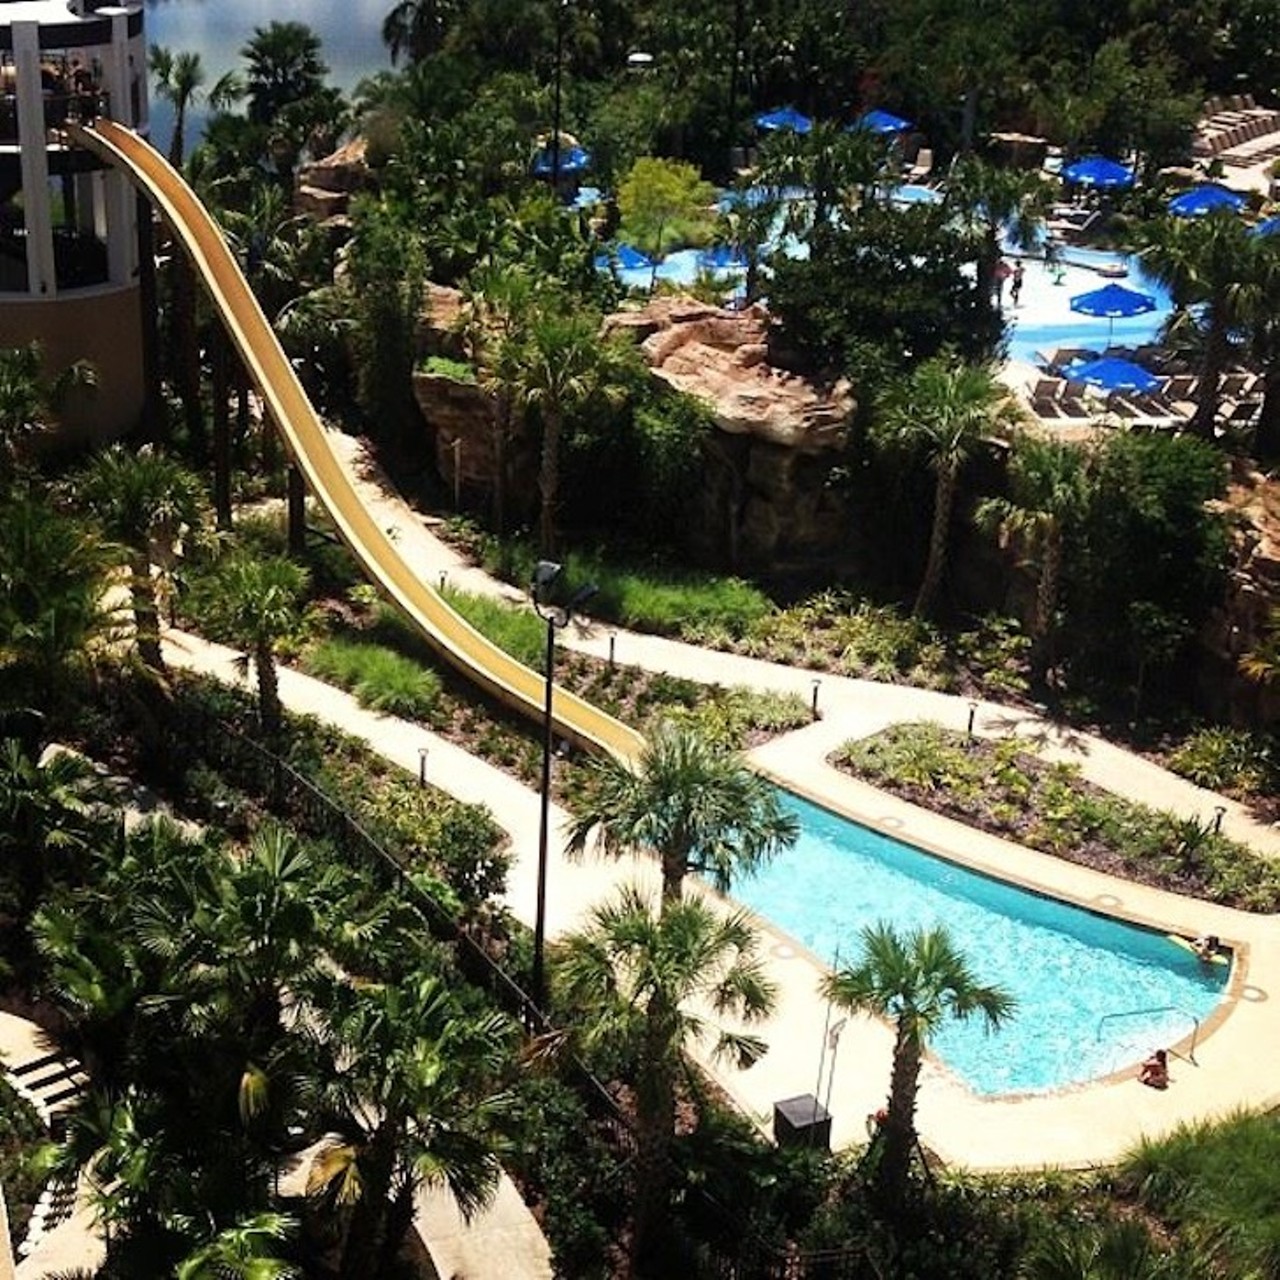 Orlando World Center Marriott Resort
8701 World Center Drive, 407-239-4200
The World Center Marriott packs on the thrills at its pools, with two winding, 200-foot water slides and a 90-foot super fast speed slide. But if the thought of hurtling full-speed into a body of water makes a little queasy, there&#146;s plenty of opportunities for relaxing, stationary fun at the hotel&#146;s oasis pool and hot tub grotto nestled under a rocky waterfall. The pools open at 8 a.m. and close at 11 p.m., but don&#146;t wait until the last minute to take that final water slide ride, as they usually close an hour earlier. Only guests staying at the resort and their visitors are allowed to use the pools and slides. 
Photo via Orlando World Center Marriott Resort/Facebook